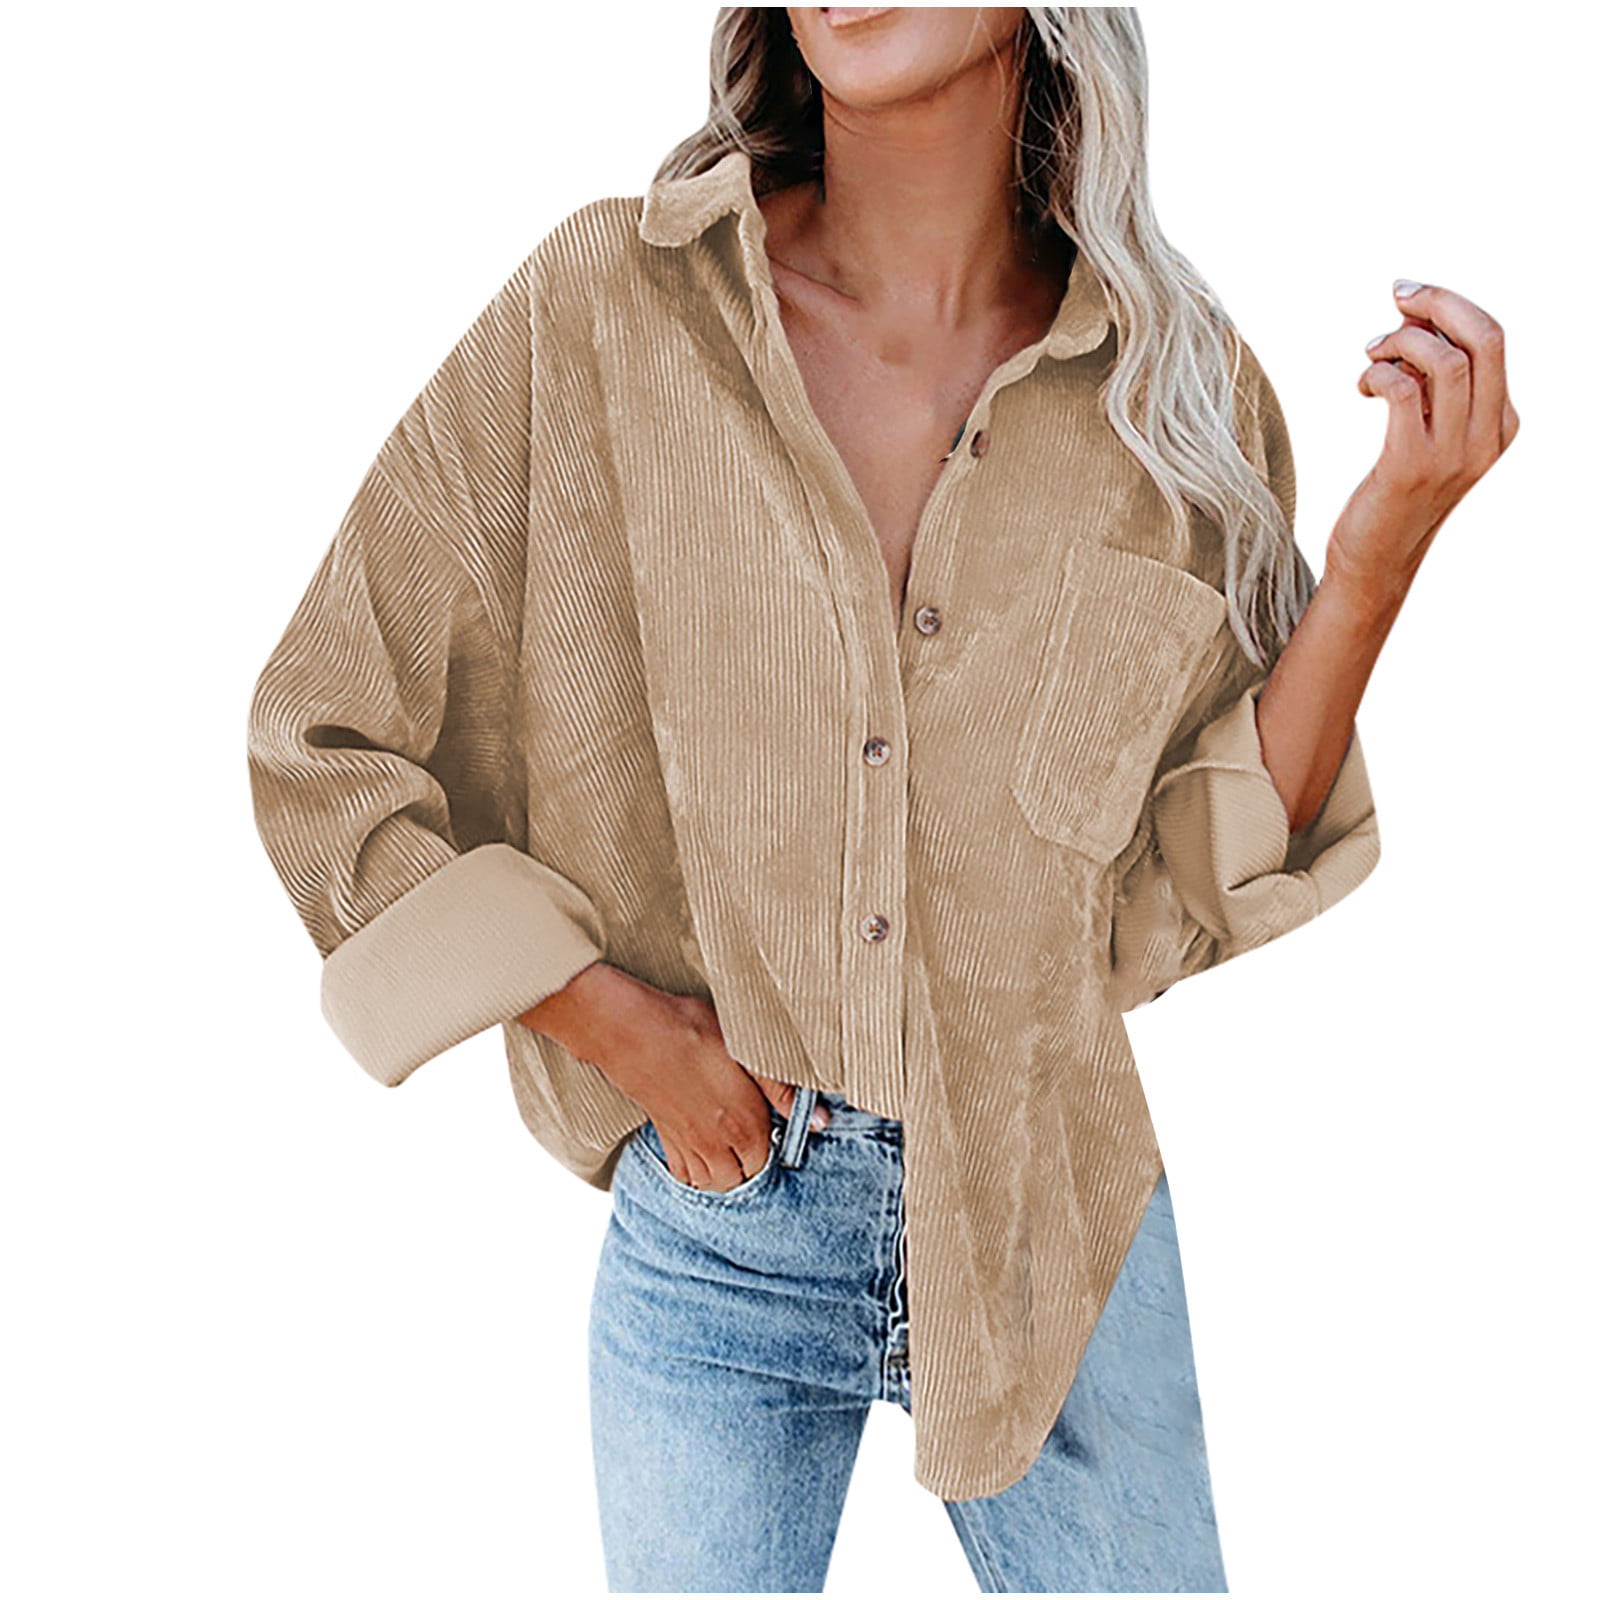 Scyoekwg Dressy Tops for Women Fall Fashion Comfy Fall Tunic Top Shirts  Button Shirts V Neck Lapel Classic Solid Color Long Sleeve Blouses  Lightweight